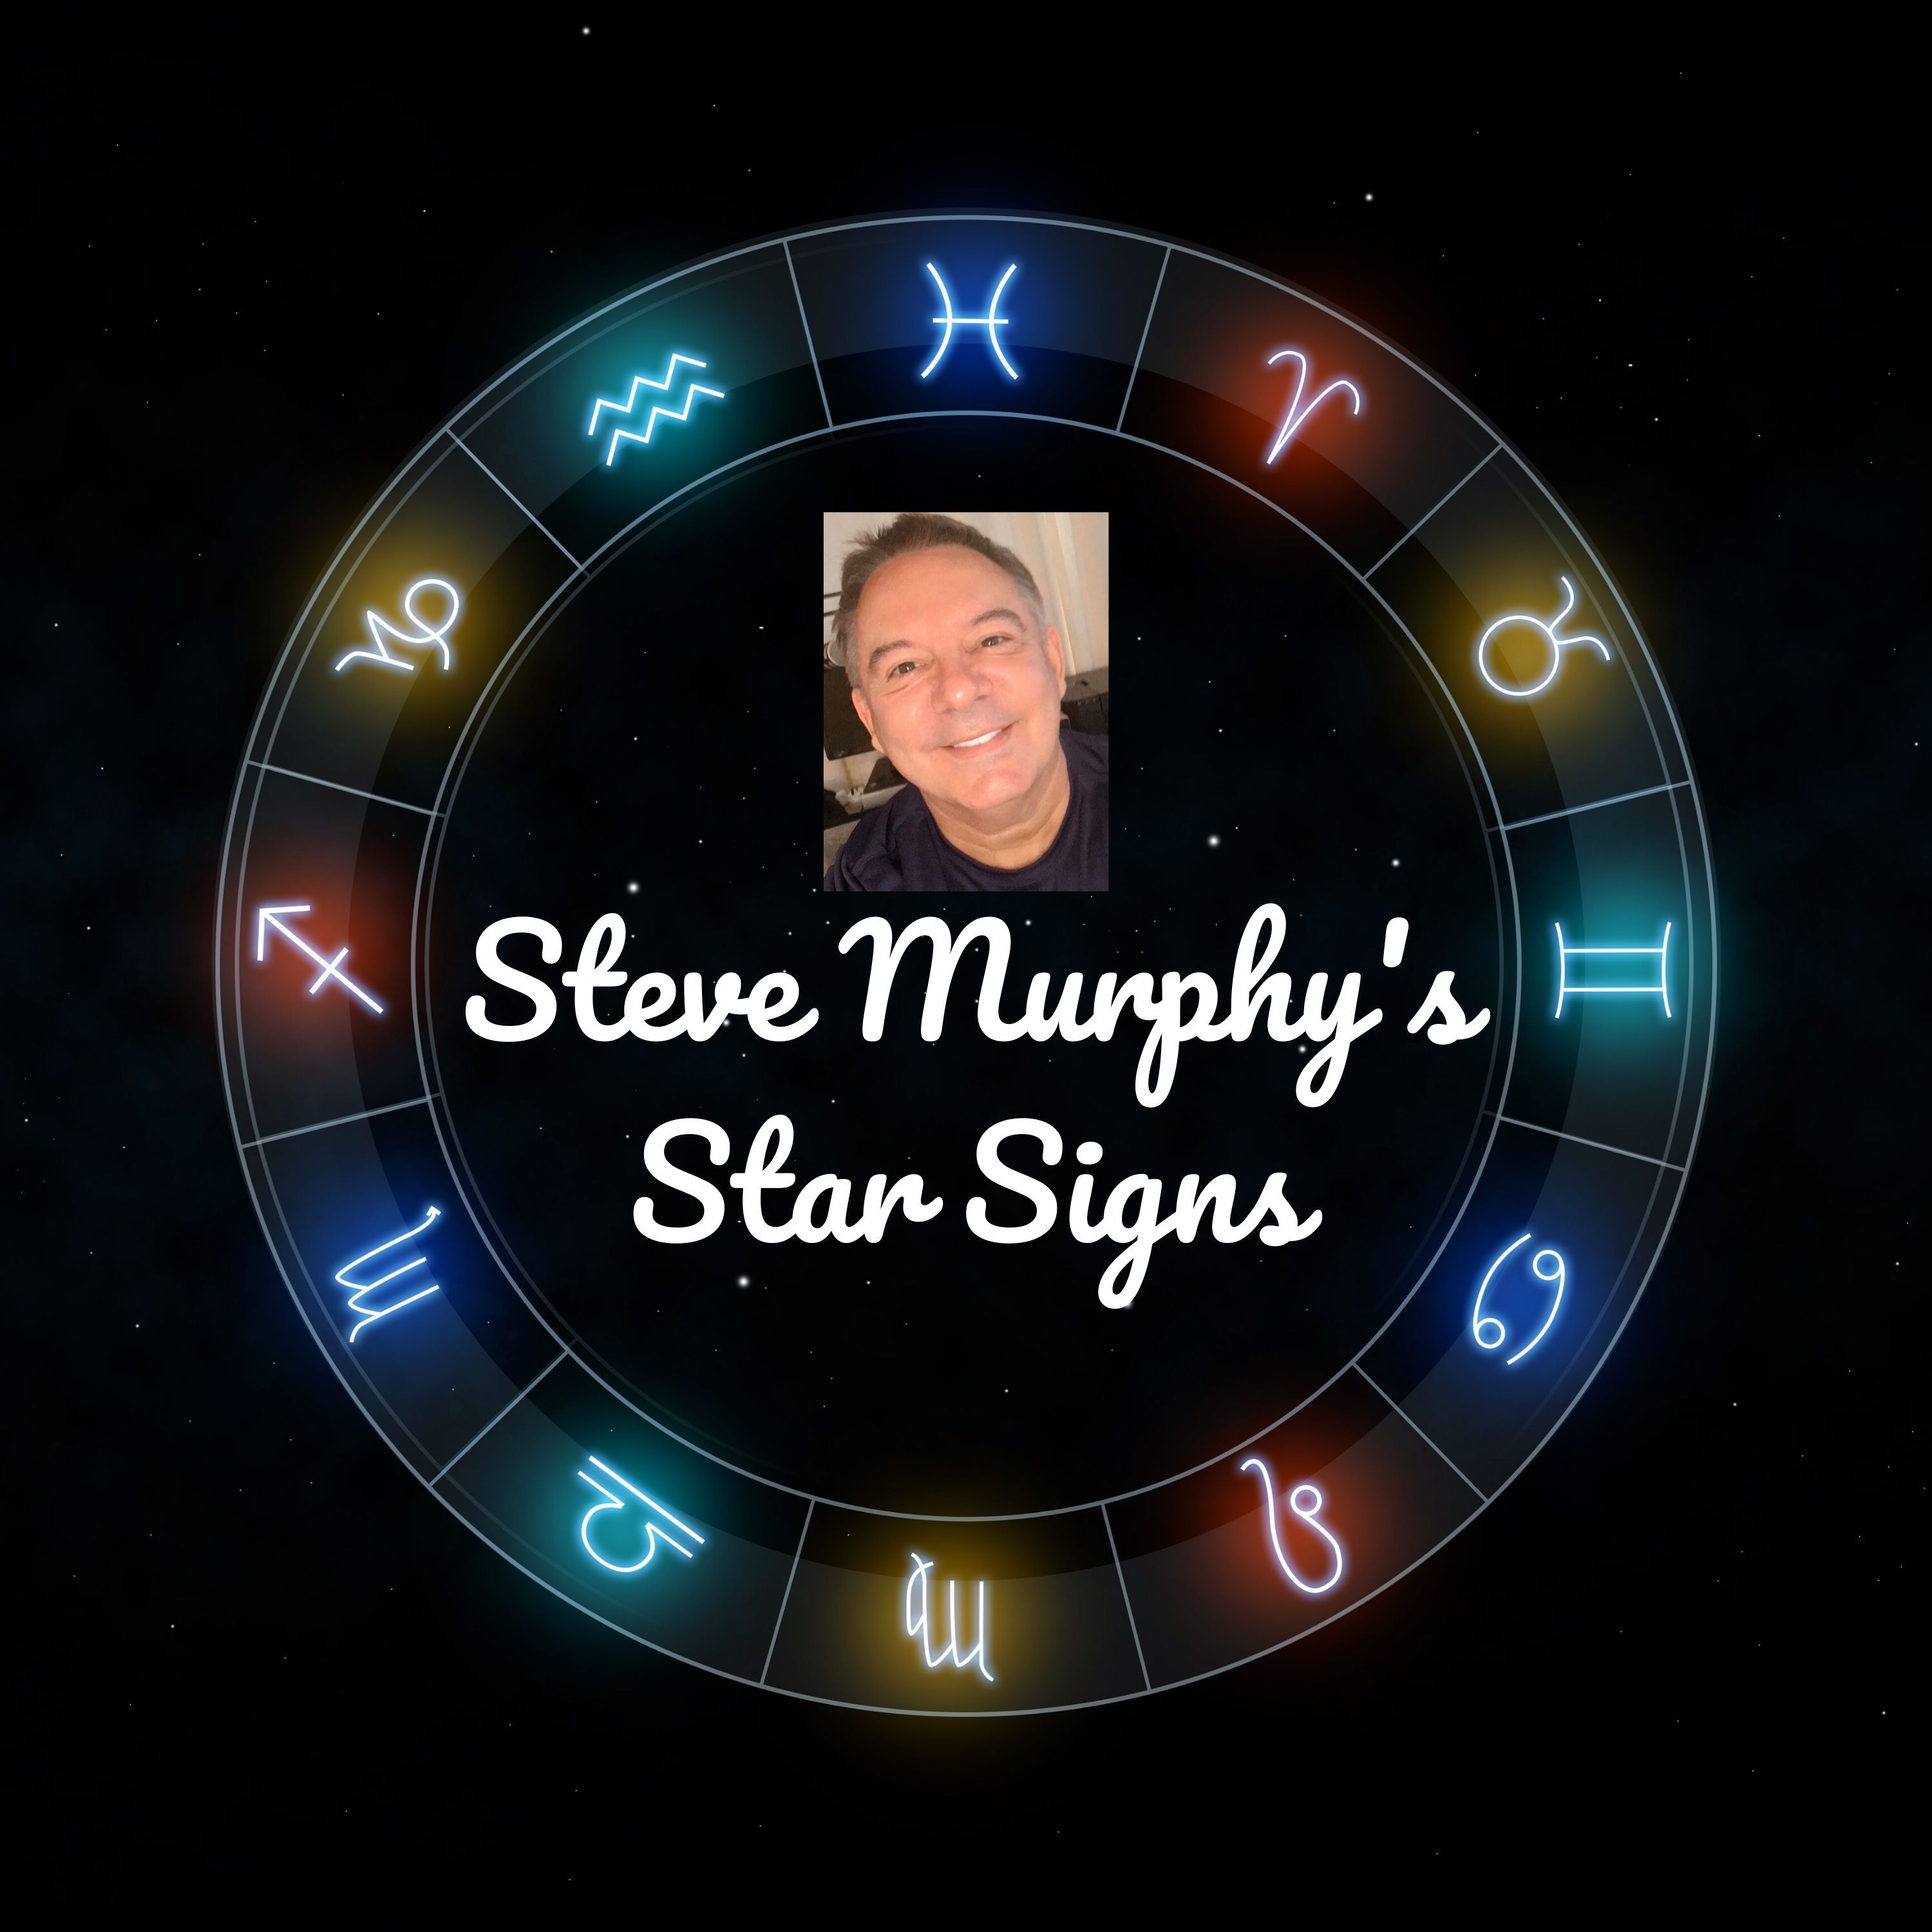 Your Star Signs Report wc 31st August 2020 - Astrology and Numerology Report